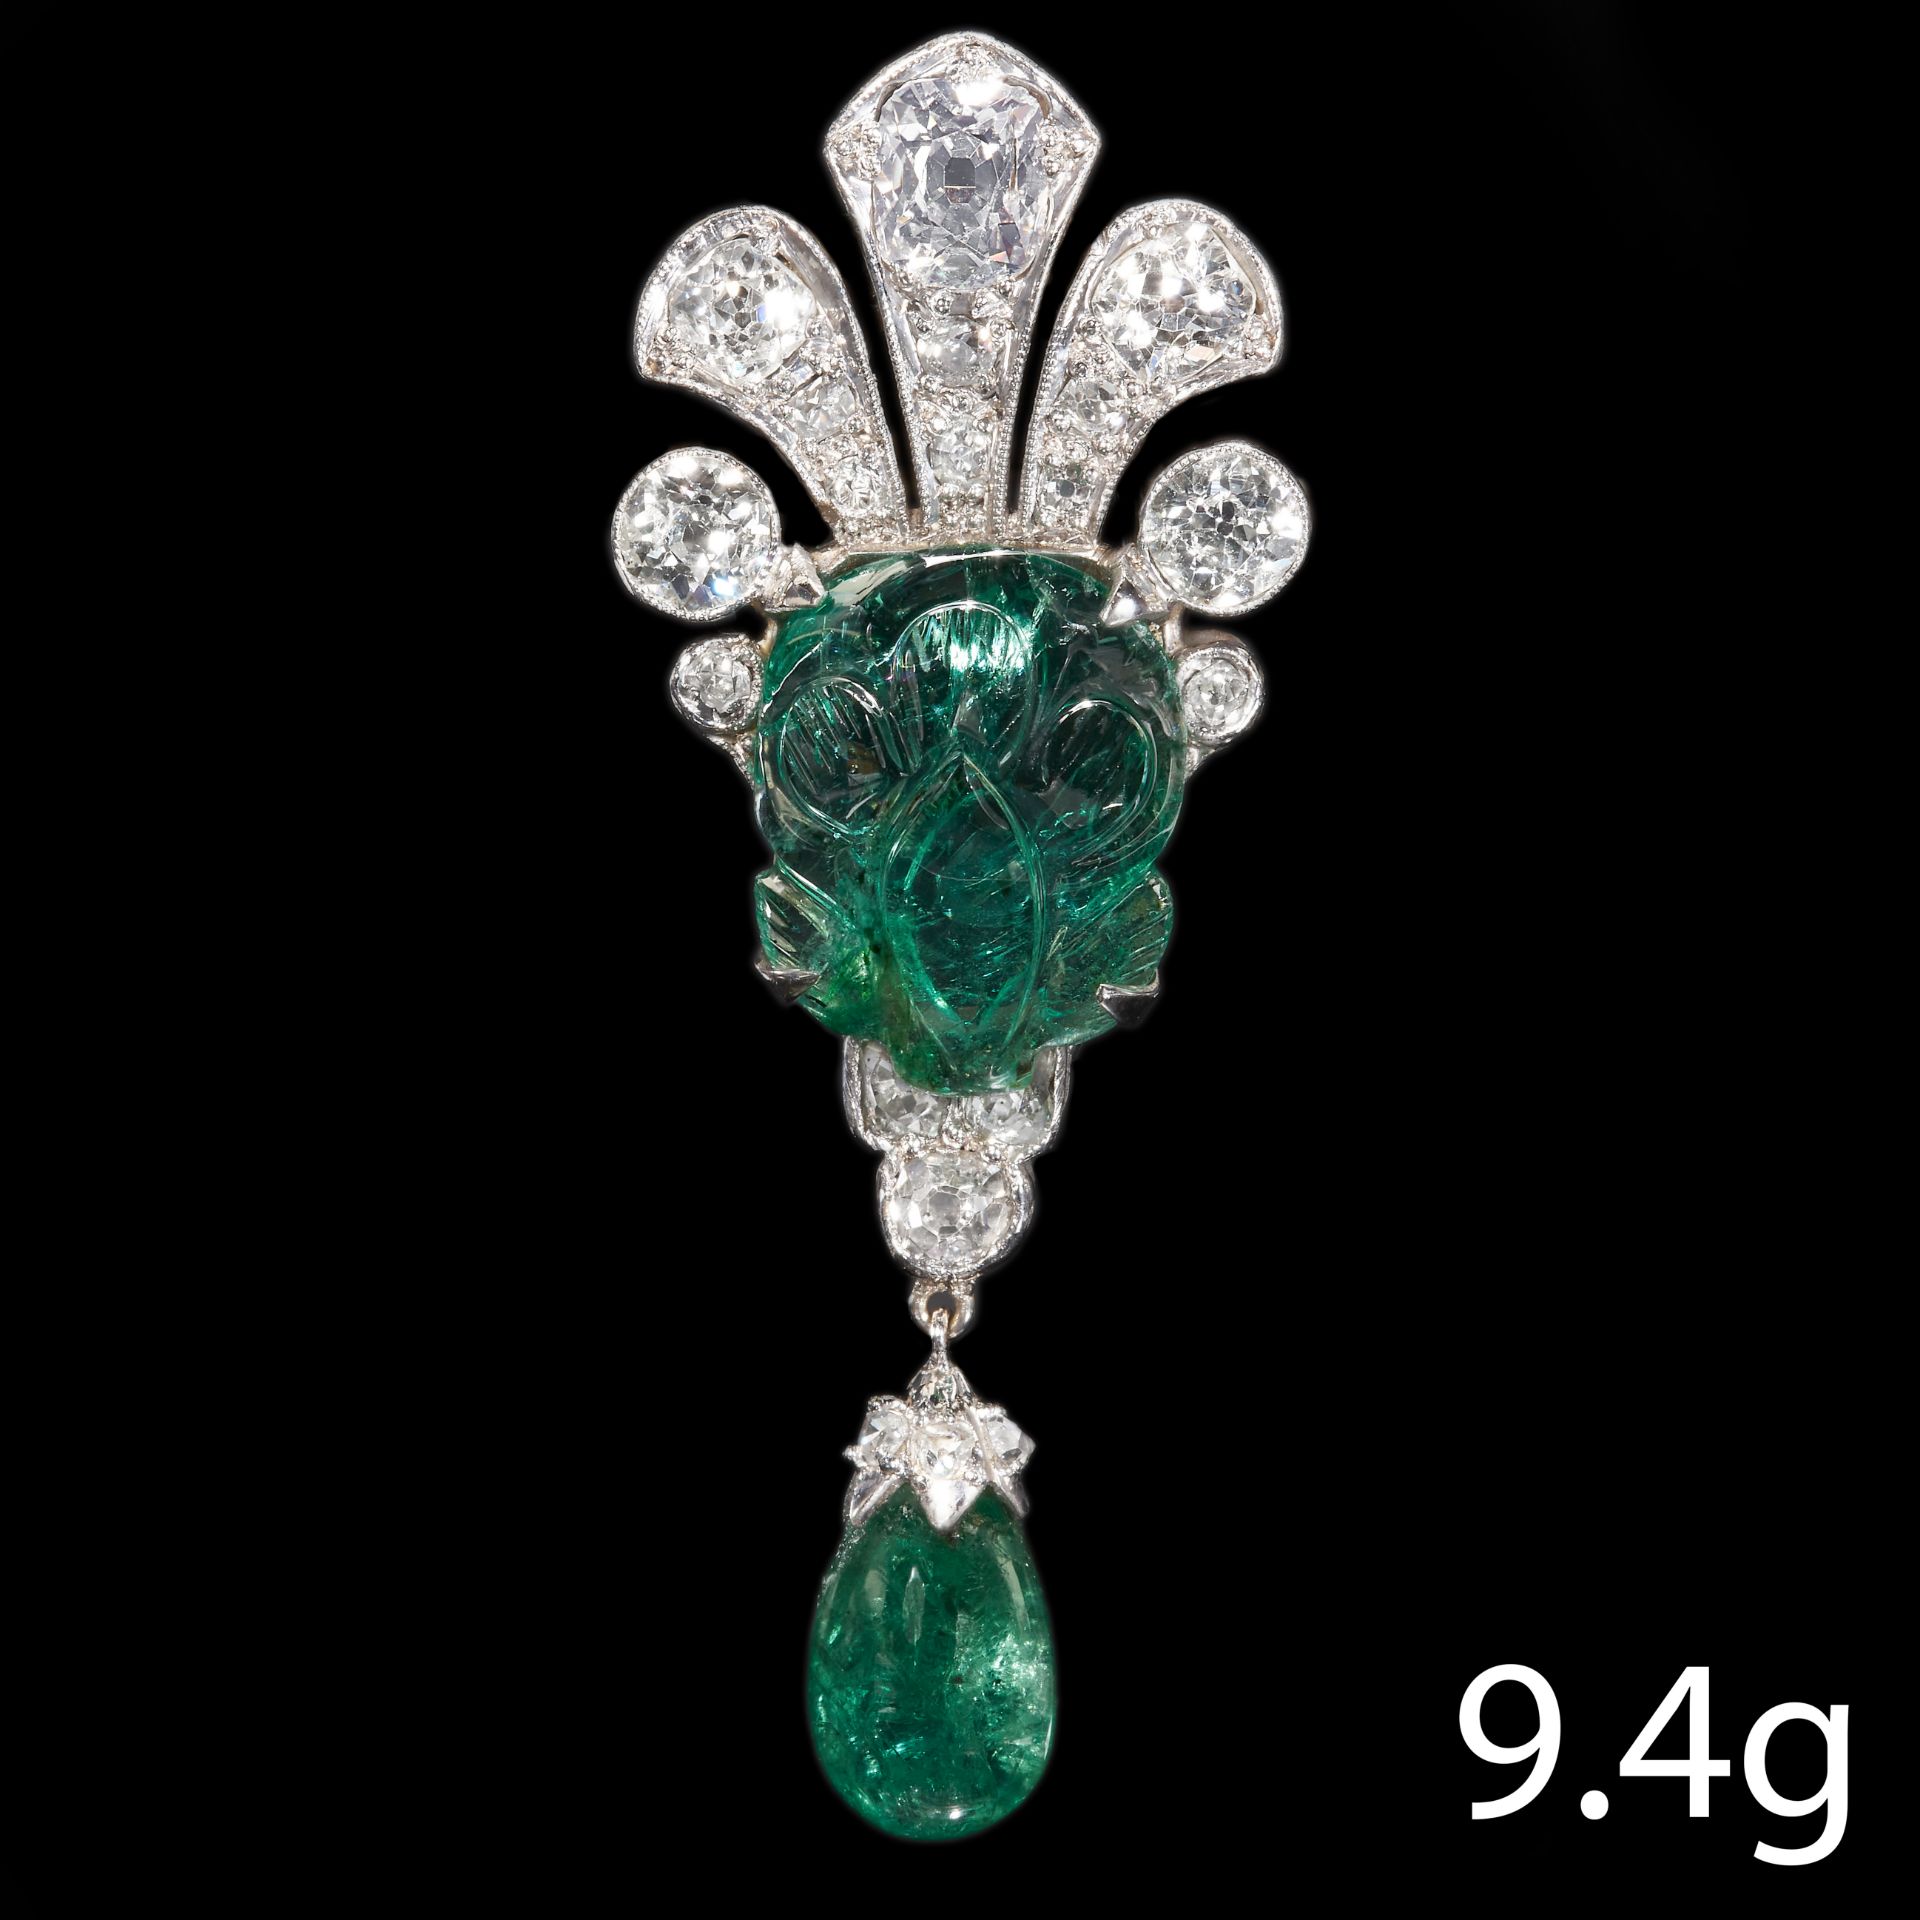 ANTIQUE CARVED EMERALD AND DIAMOND CLIP BROOCH